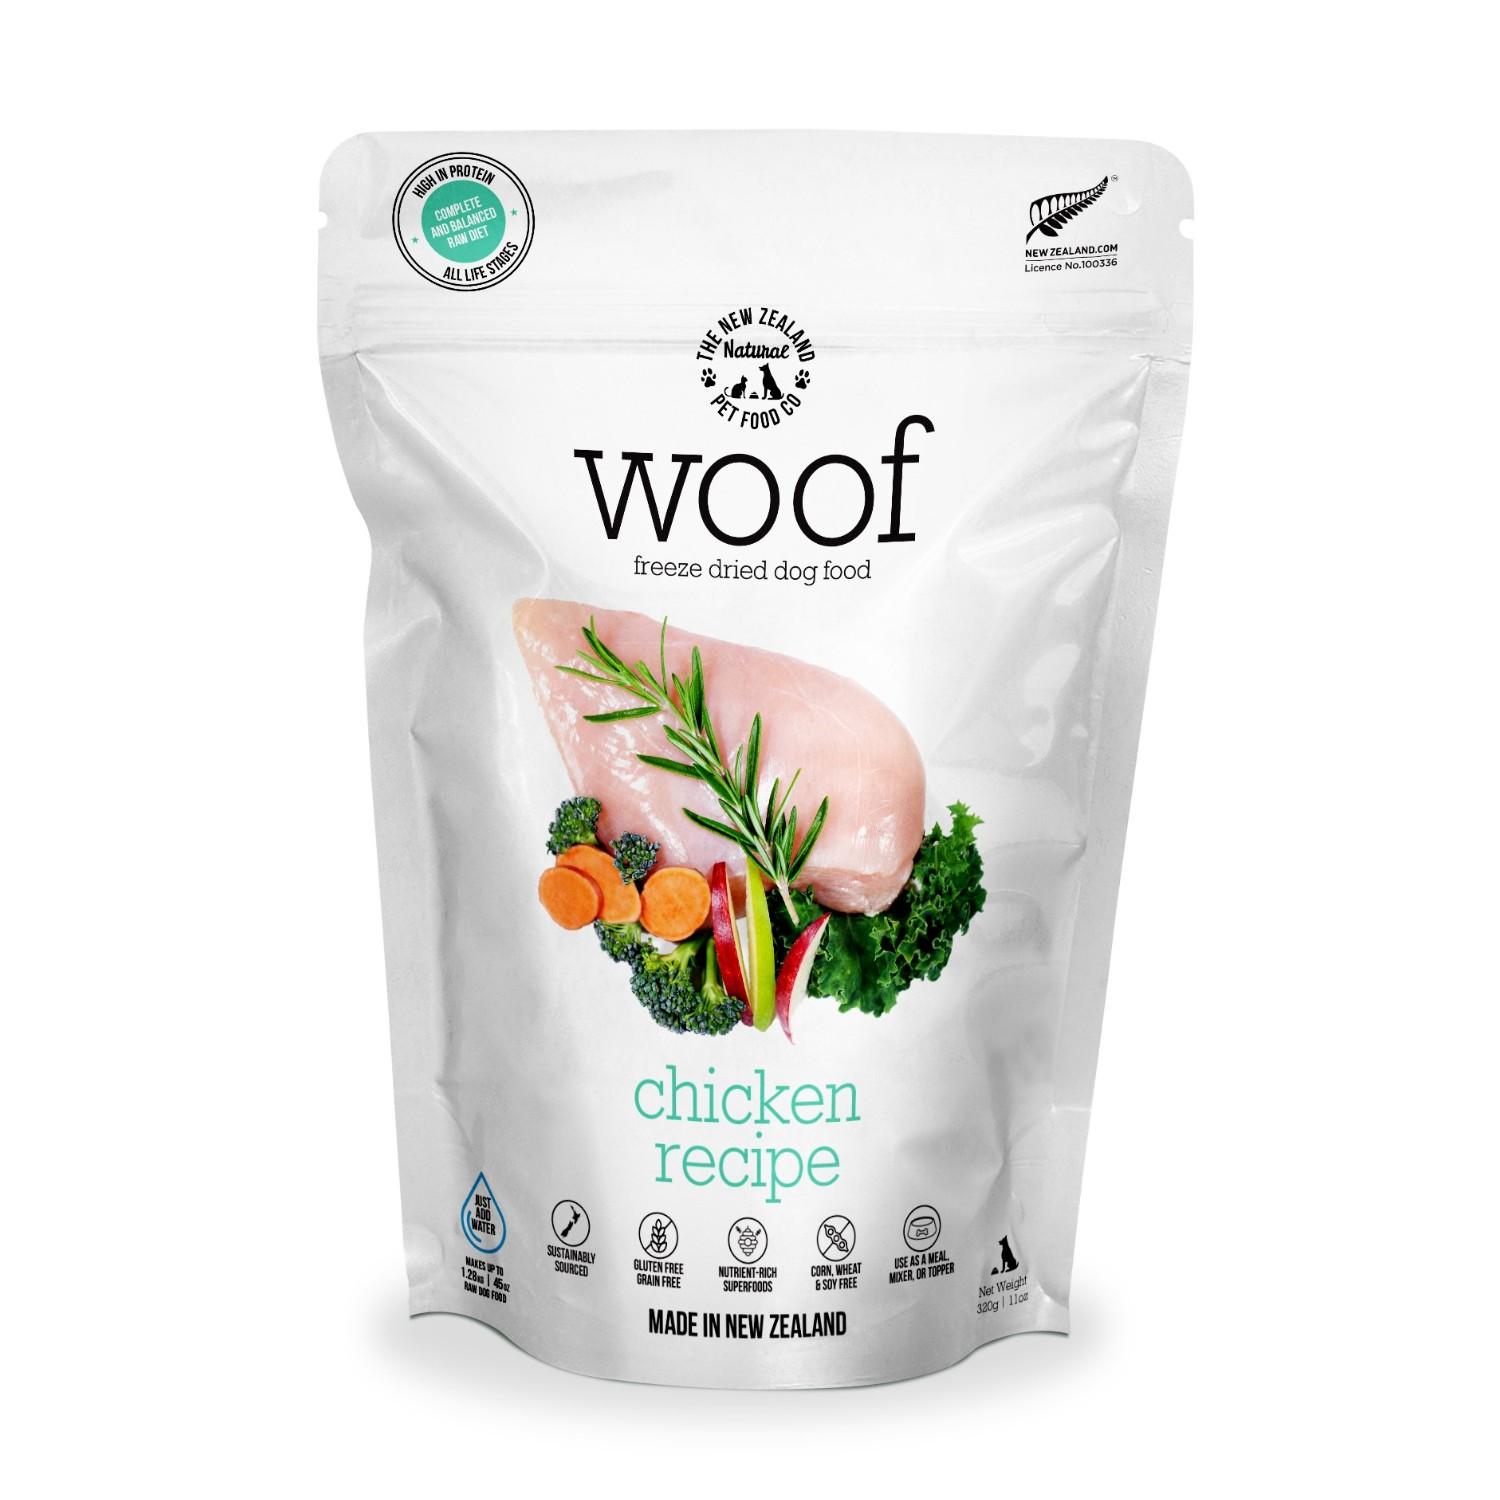 The New Zealand Natural Pet Food Co. Woof Freeze Dried Dog Food - Chicken